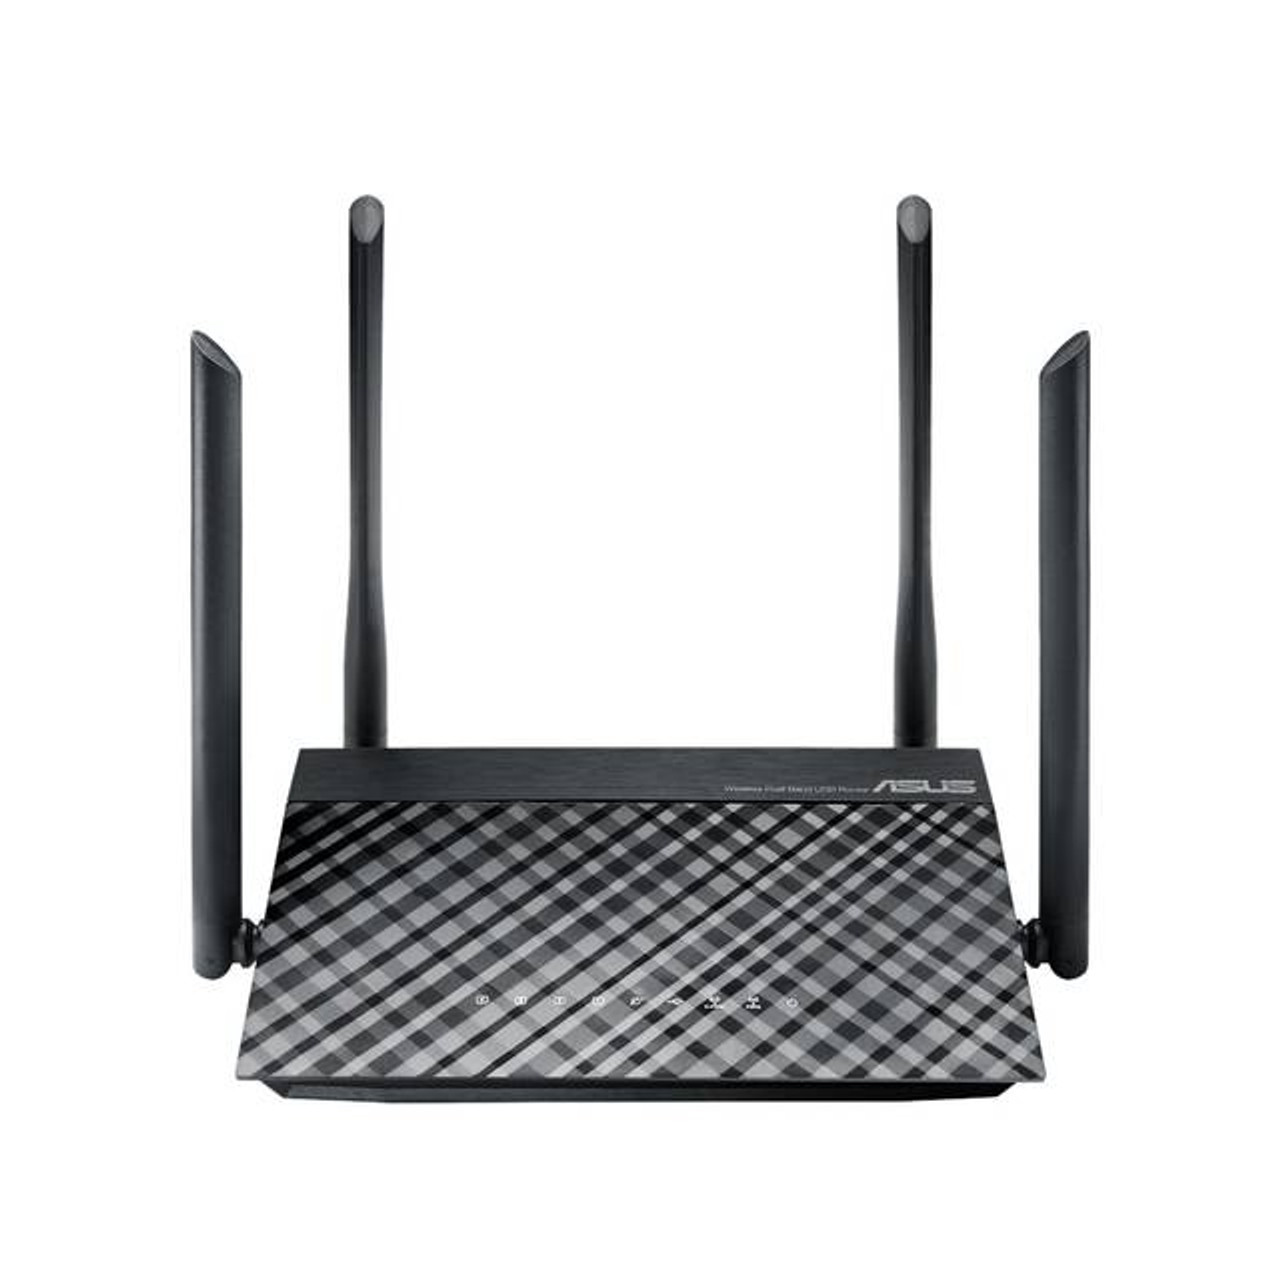 Asus RT-AC1200 Dual-band Wireless-AC1200 USB Router